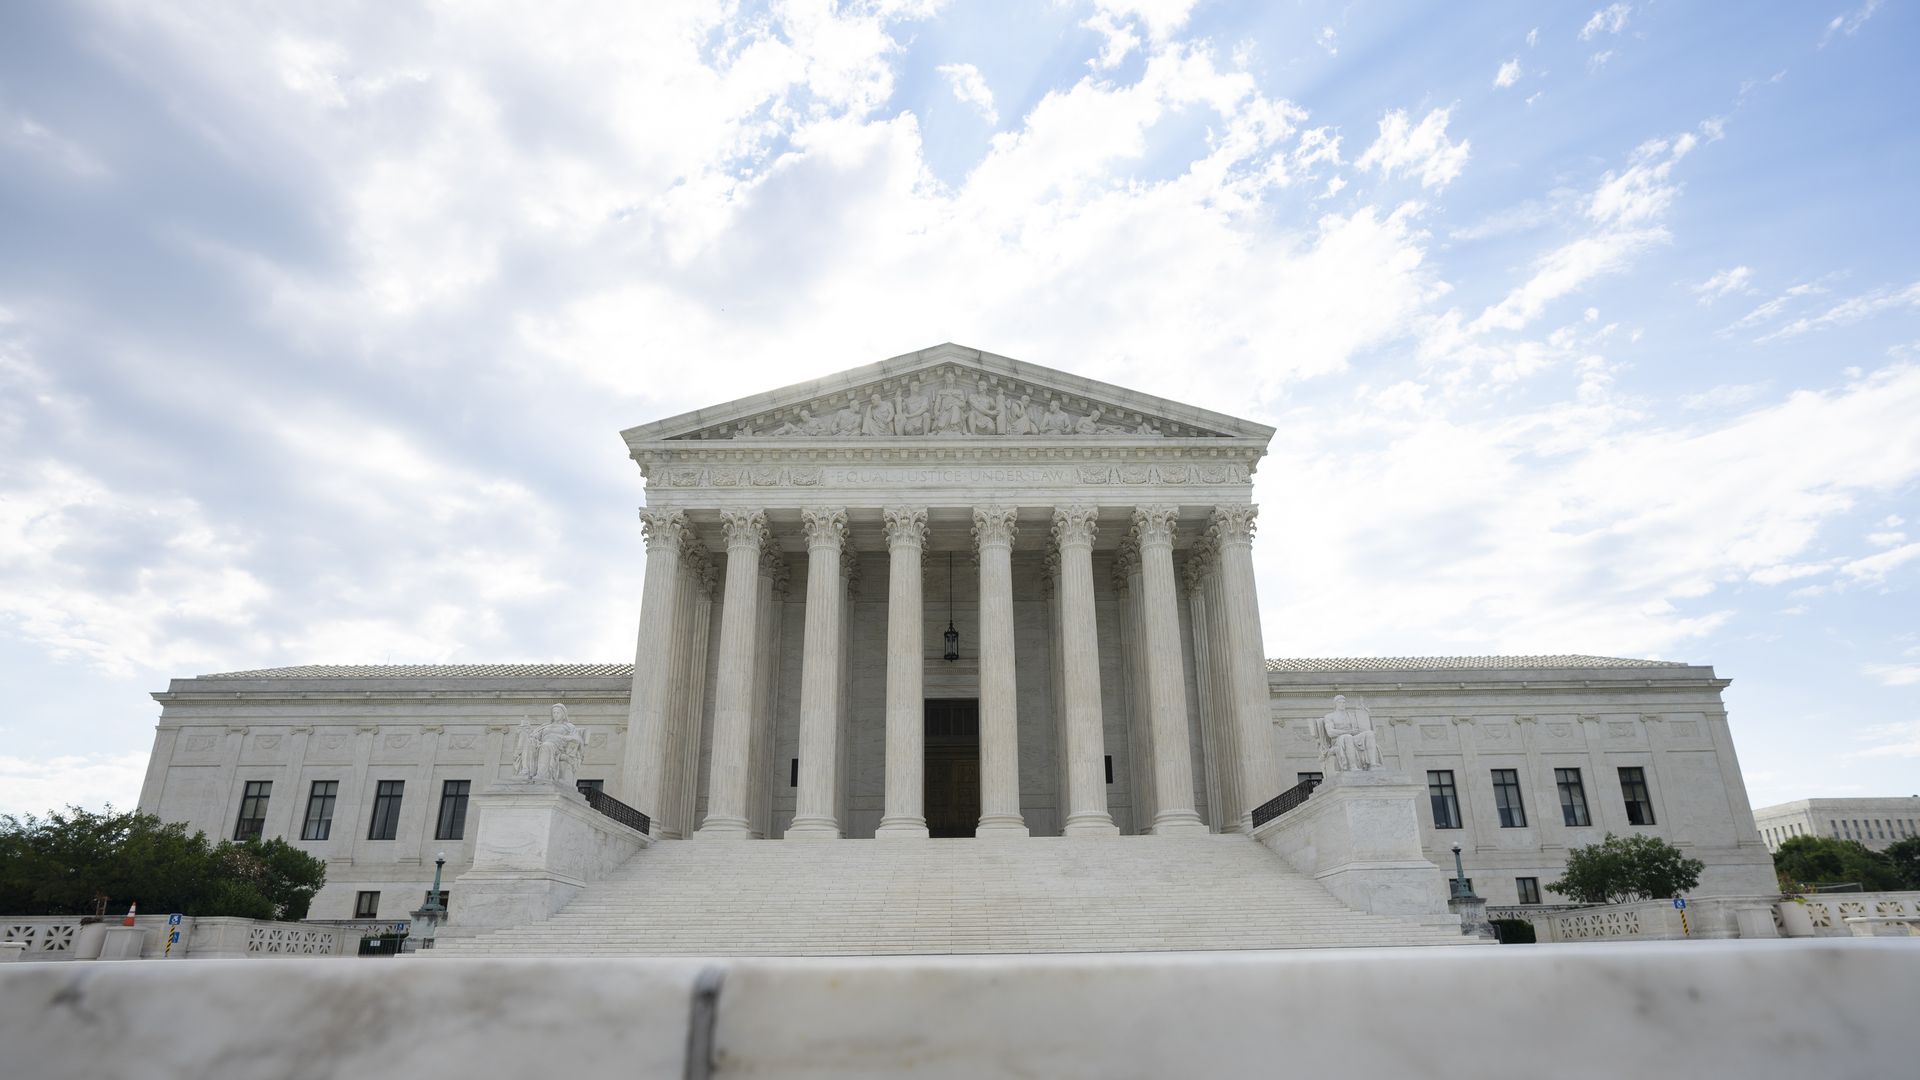 A photo of the U.S. Supreme Court building in Washington, D.C.